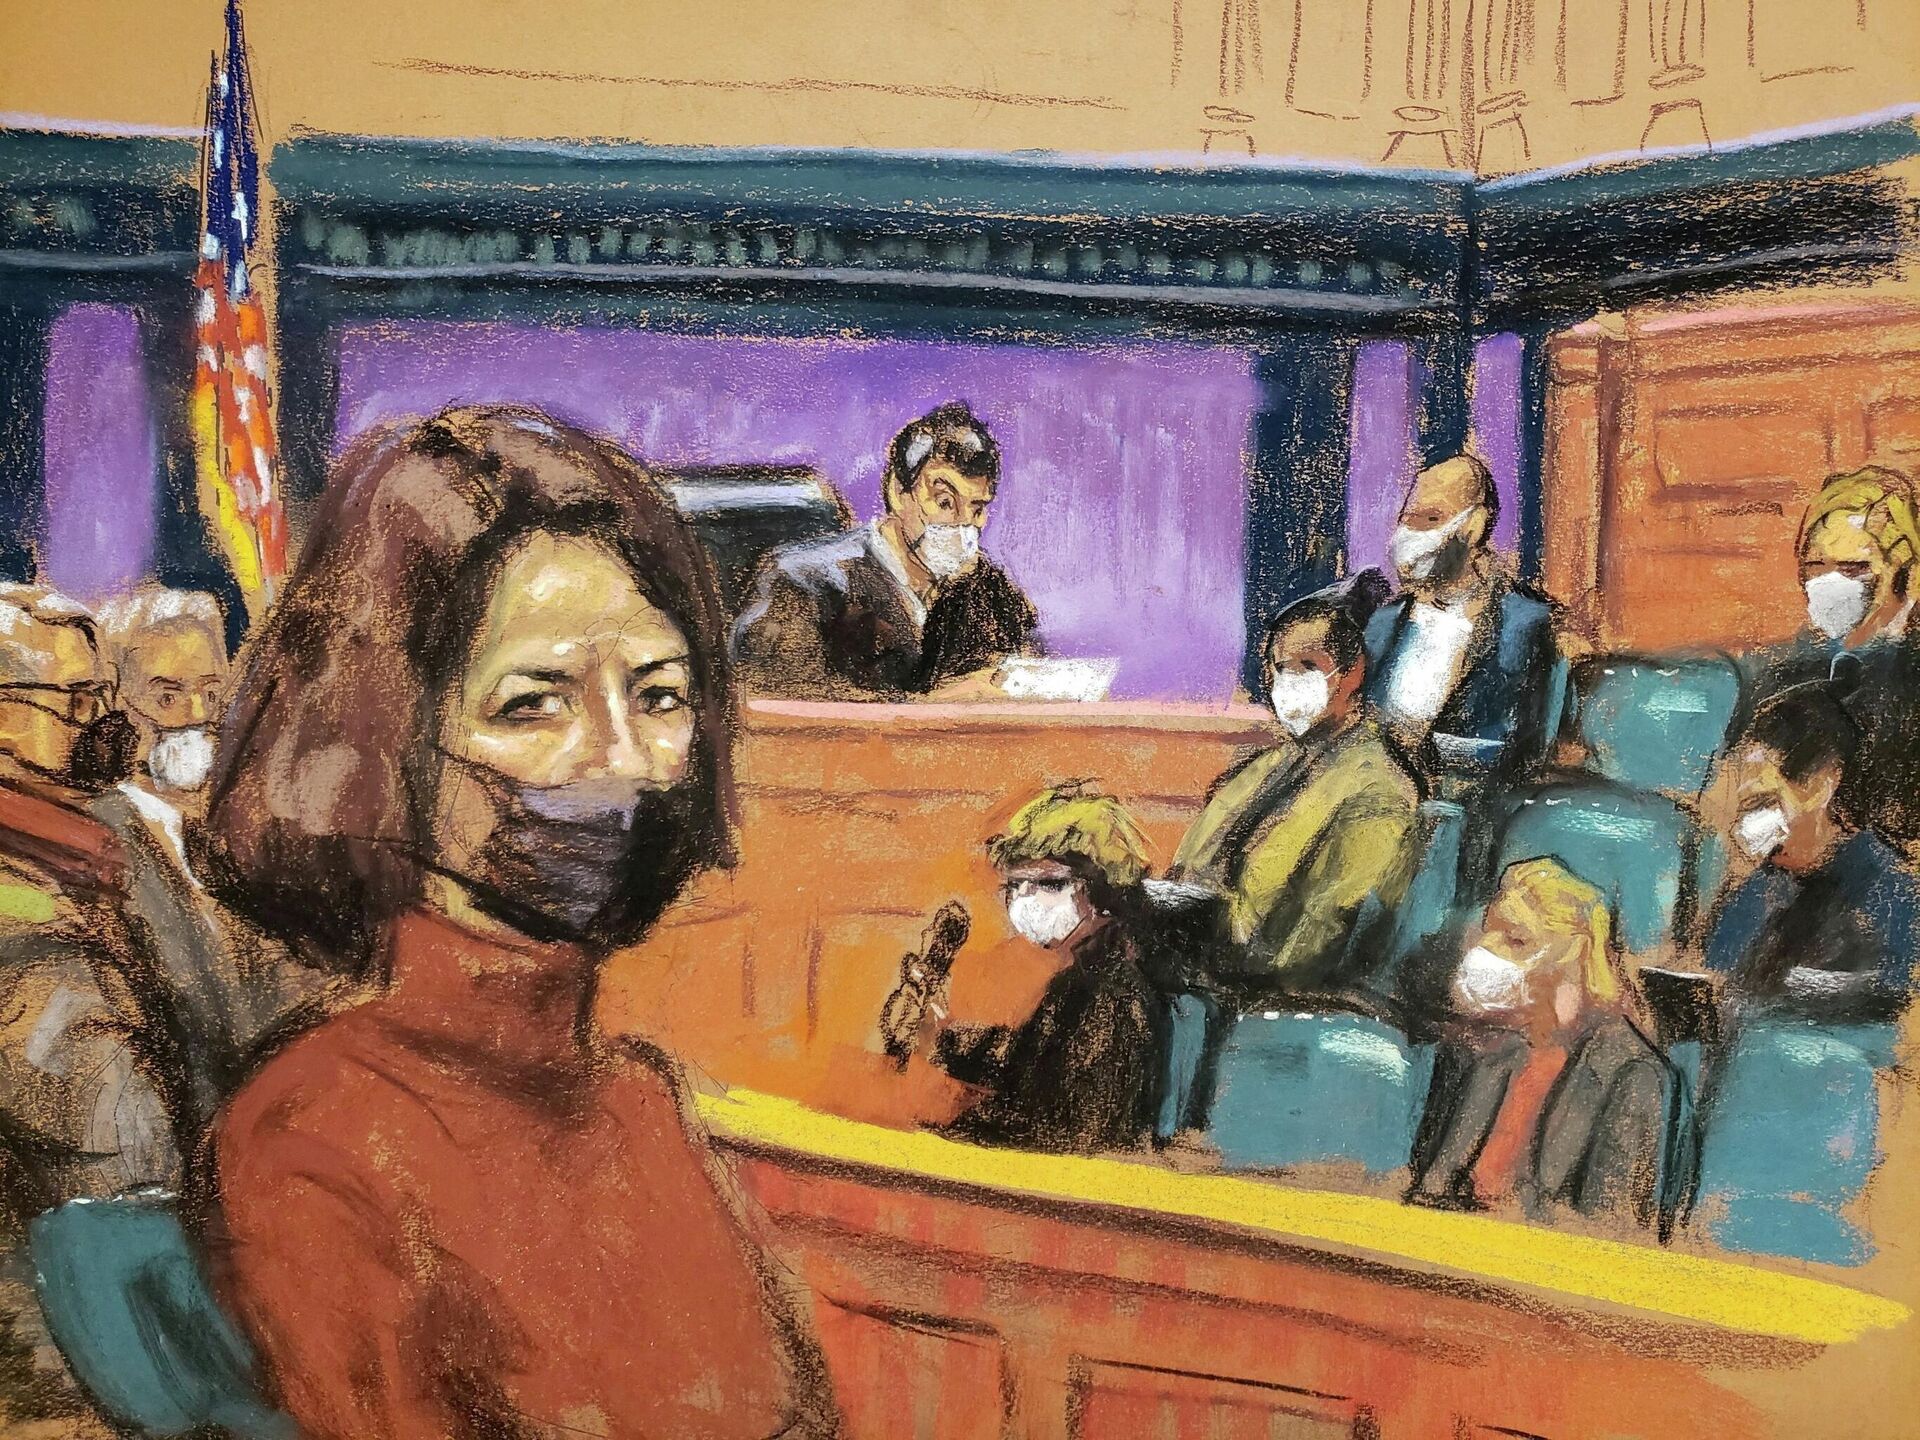  Jeffrey Epstein associate Ghislaine Maxwell sits as the guilty verdict in her sex abuse trial is read in a courtroom sketch in New York City, U.S., December 29, 2021 - Sputnik International, 1920, 06.03.2022